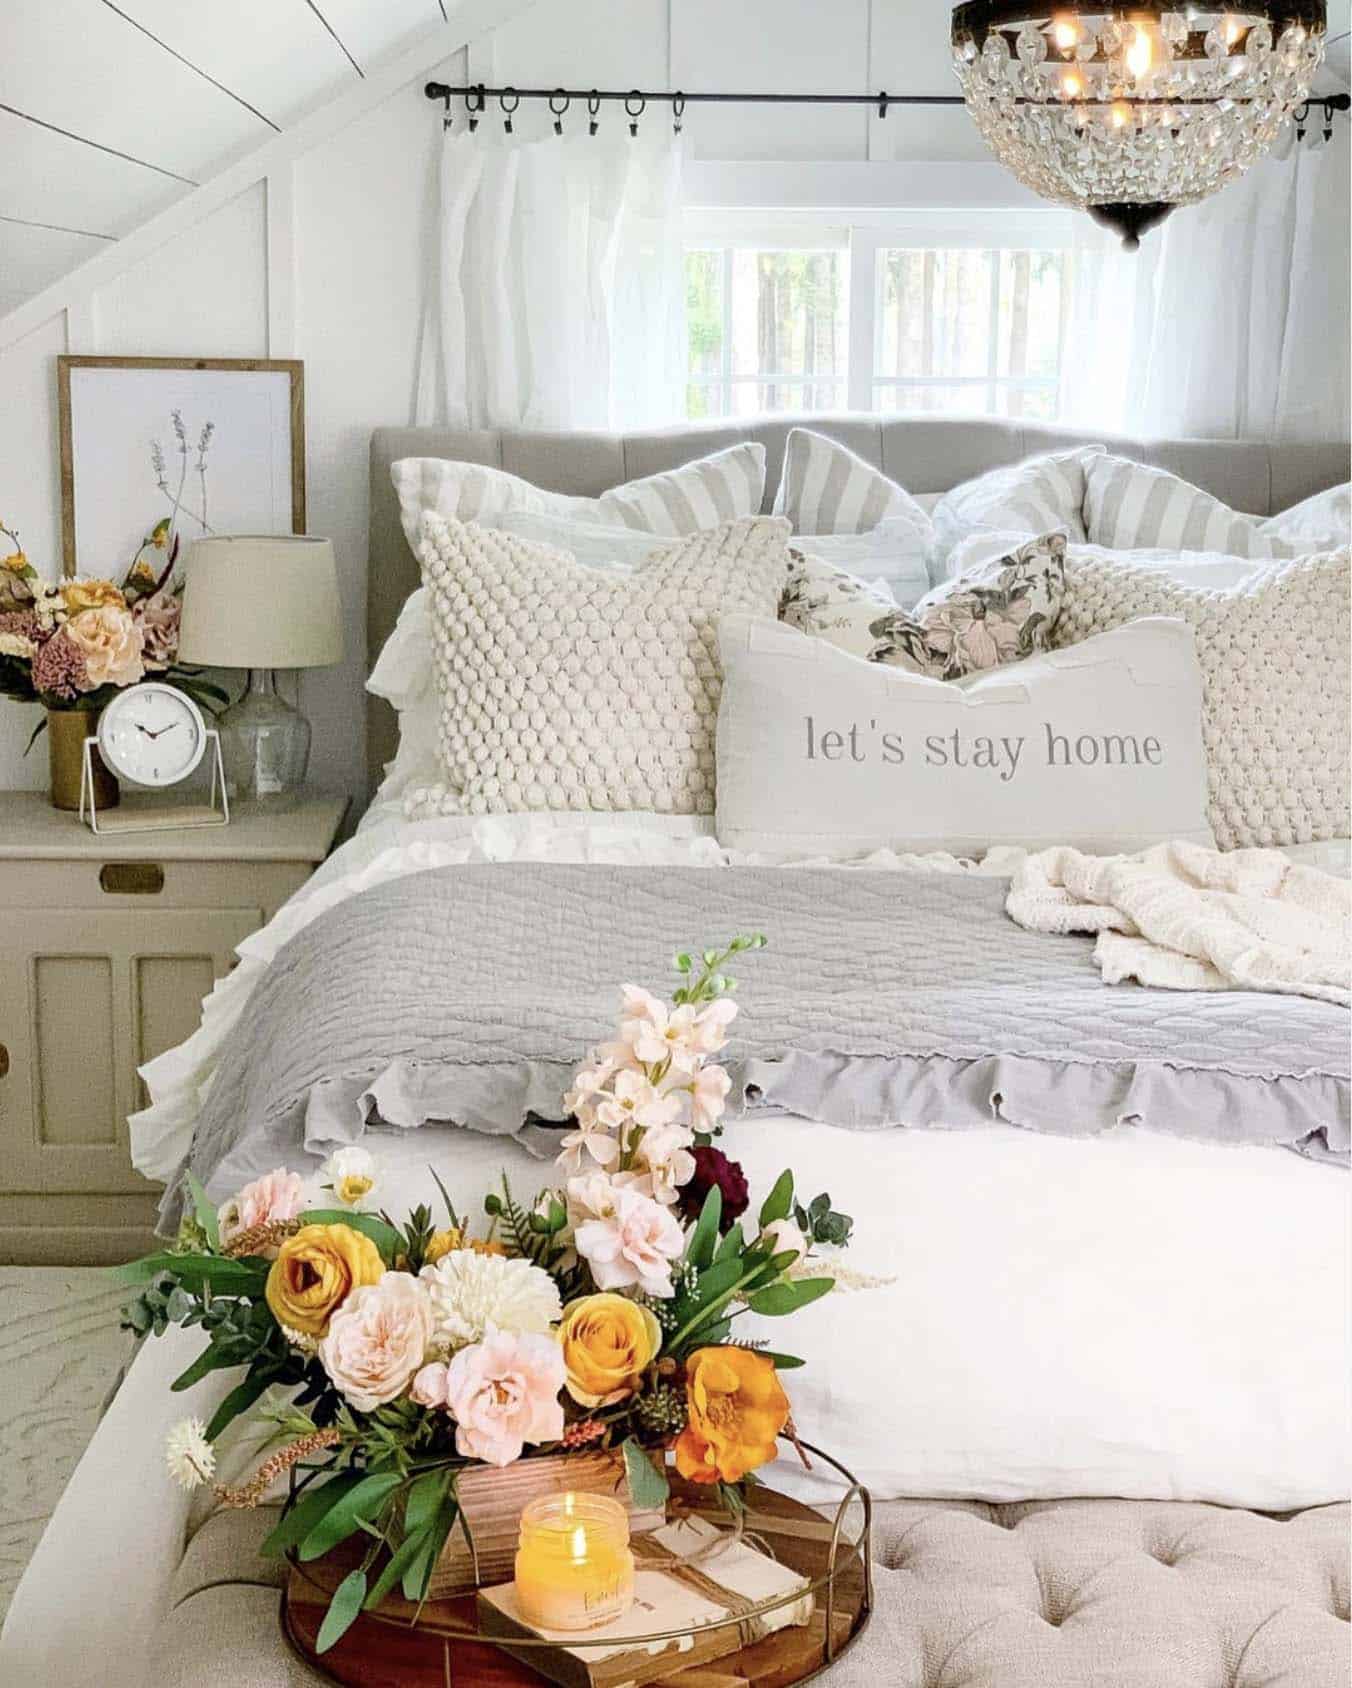 Soft and relaxing bedroom with flowers and a chandelier